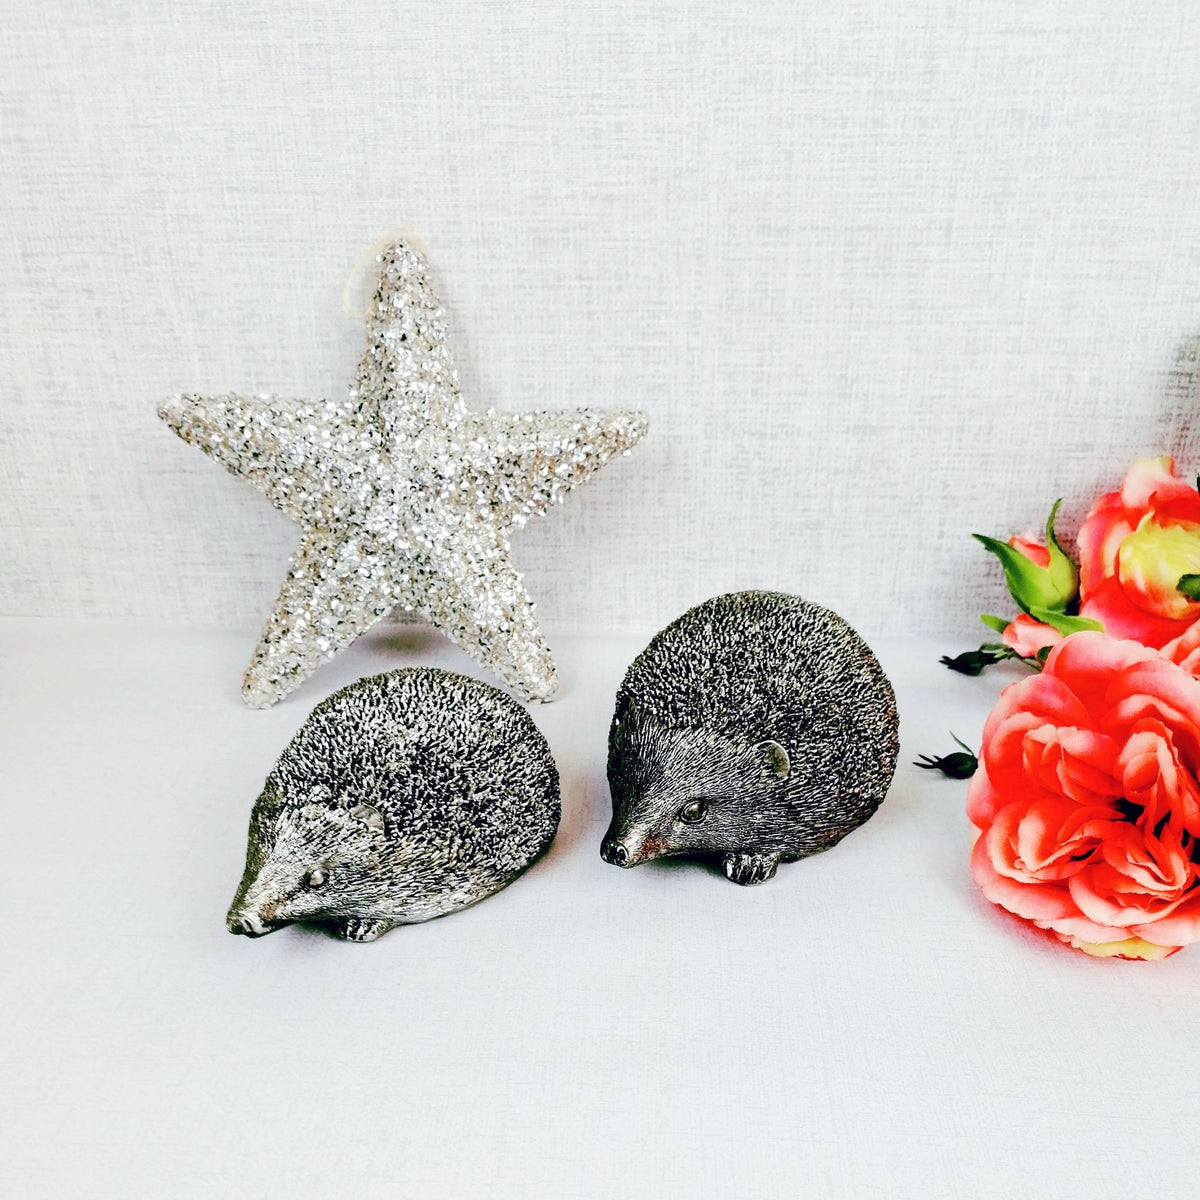 Decorative Silver Style Hedgehogs ornaments with Christmas star and pink flowers